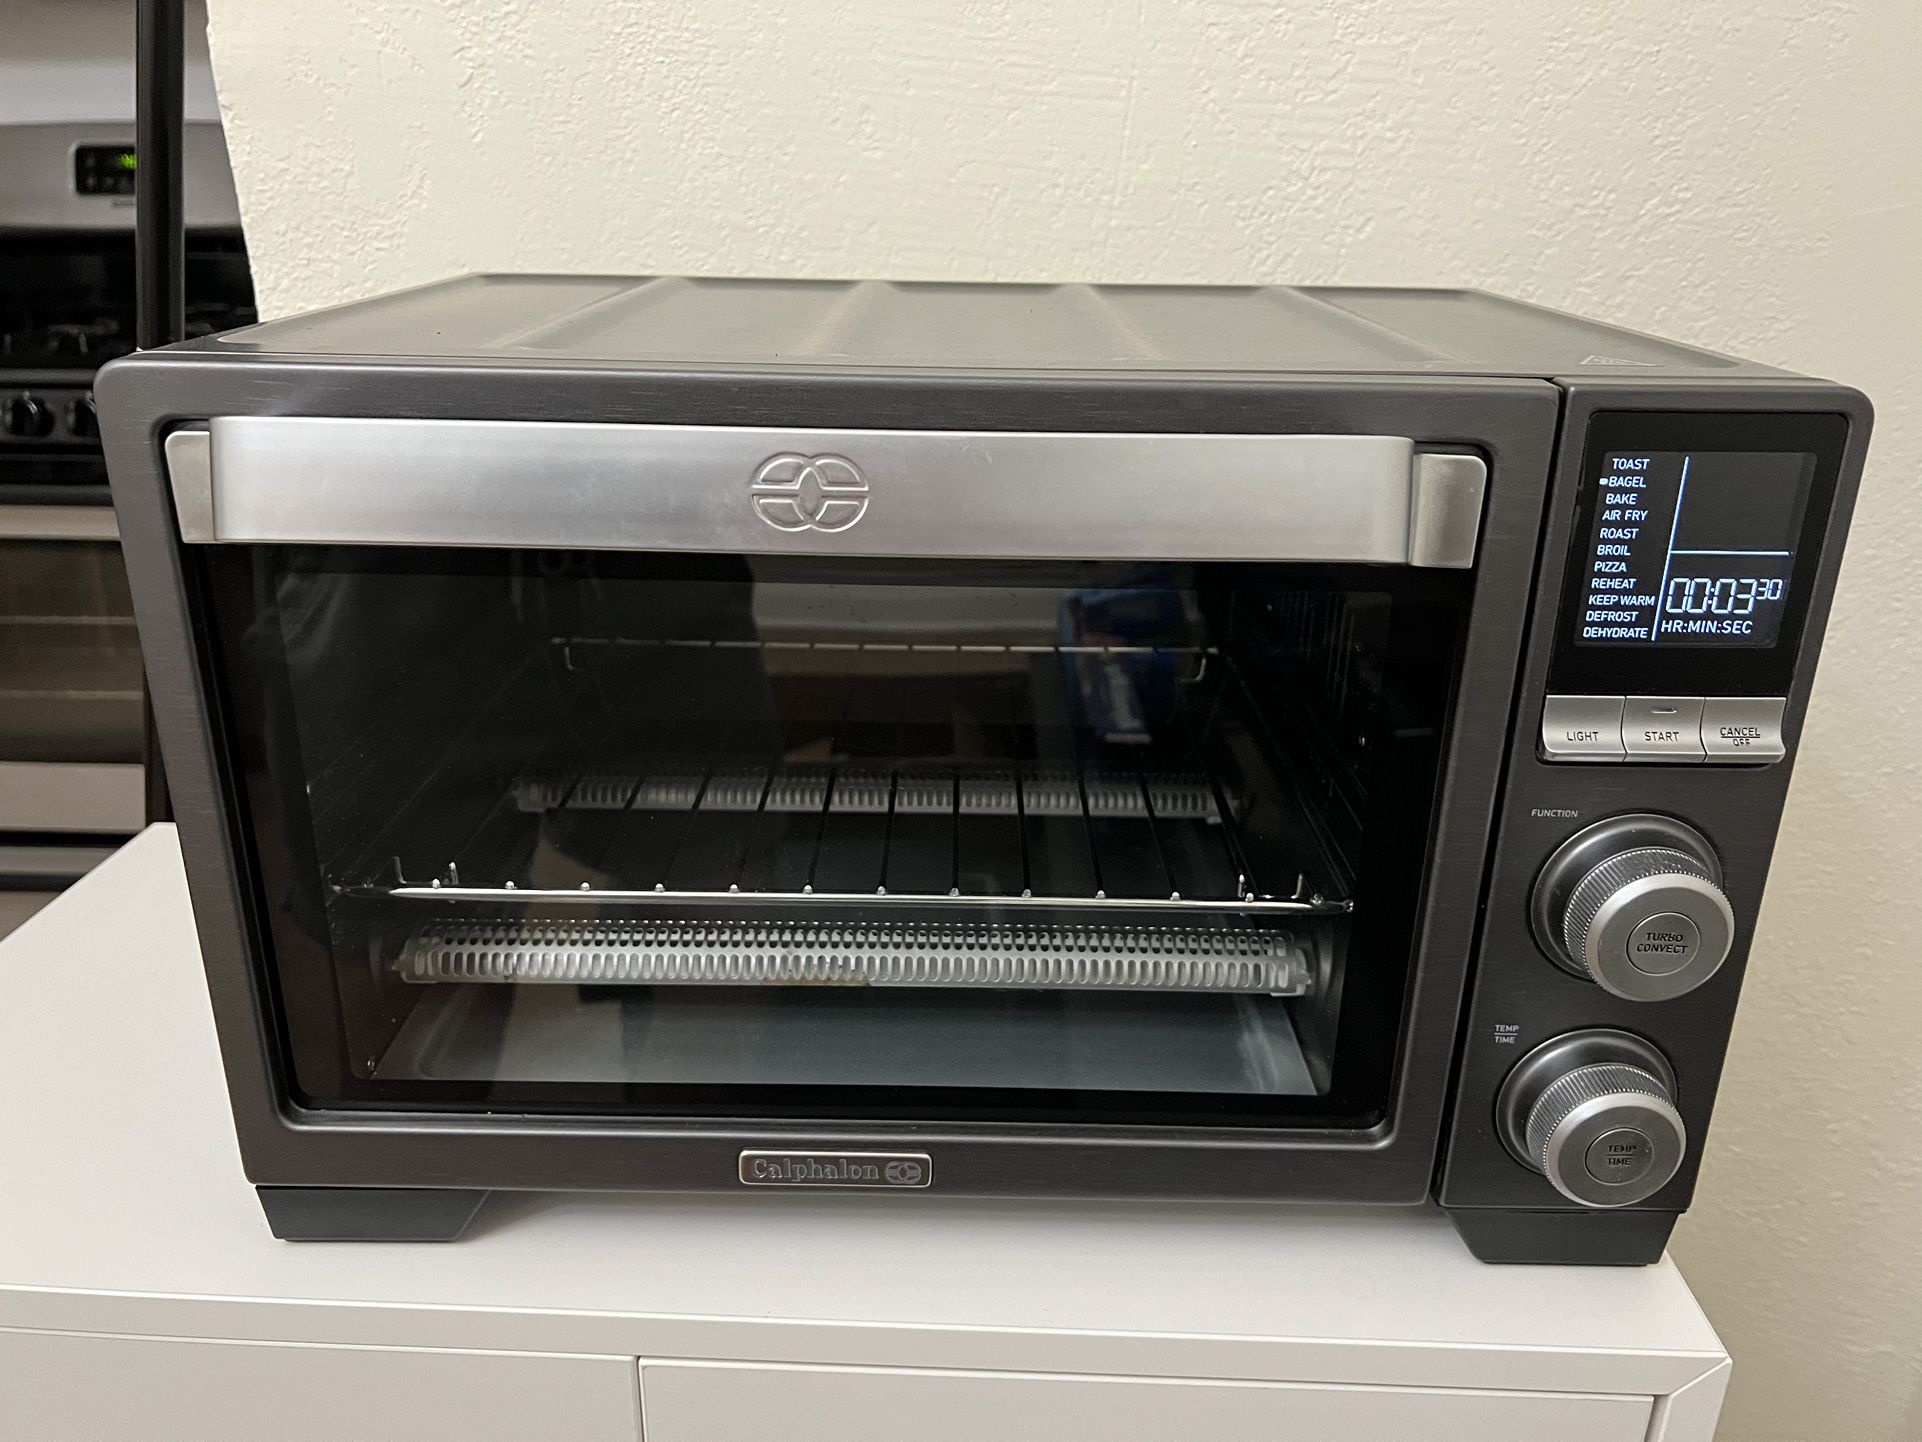 Calphalon Toaster Oven Air Fryer for Sale in Roseville, CA - OfferUp